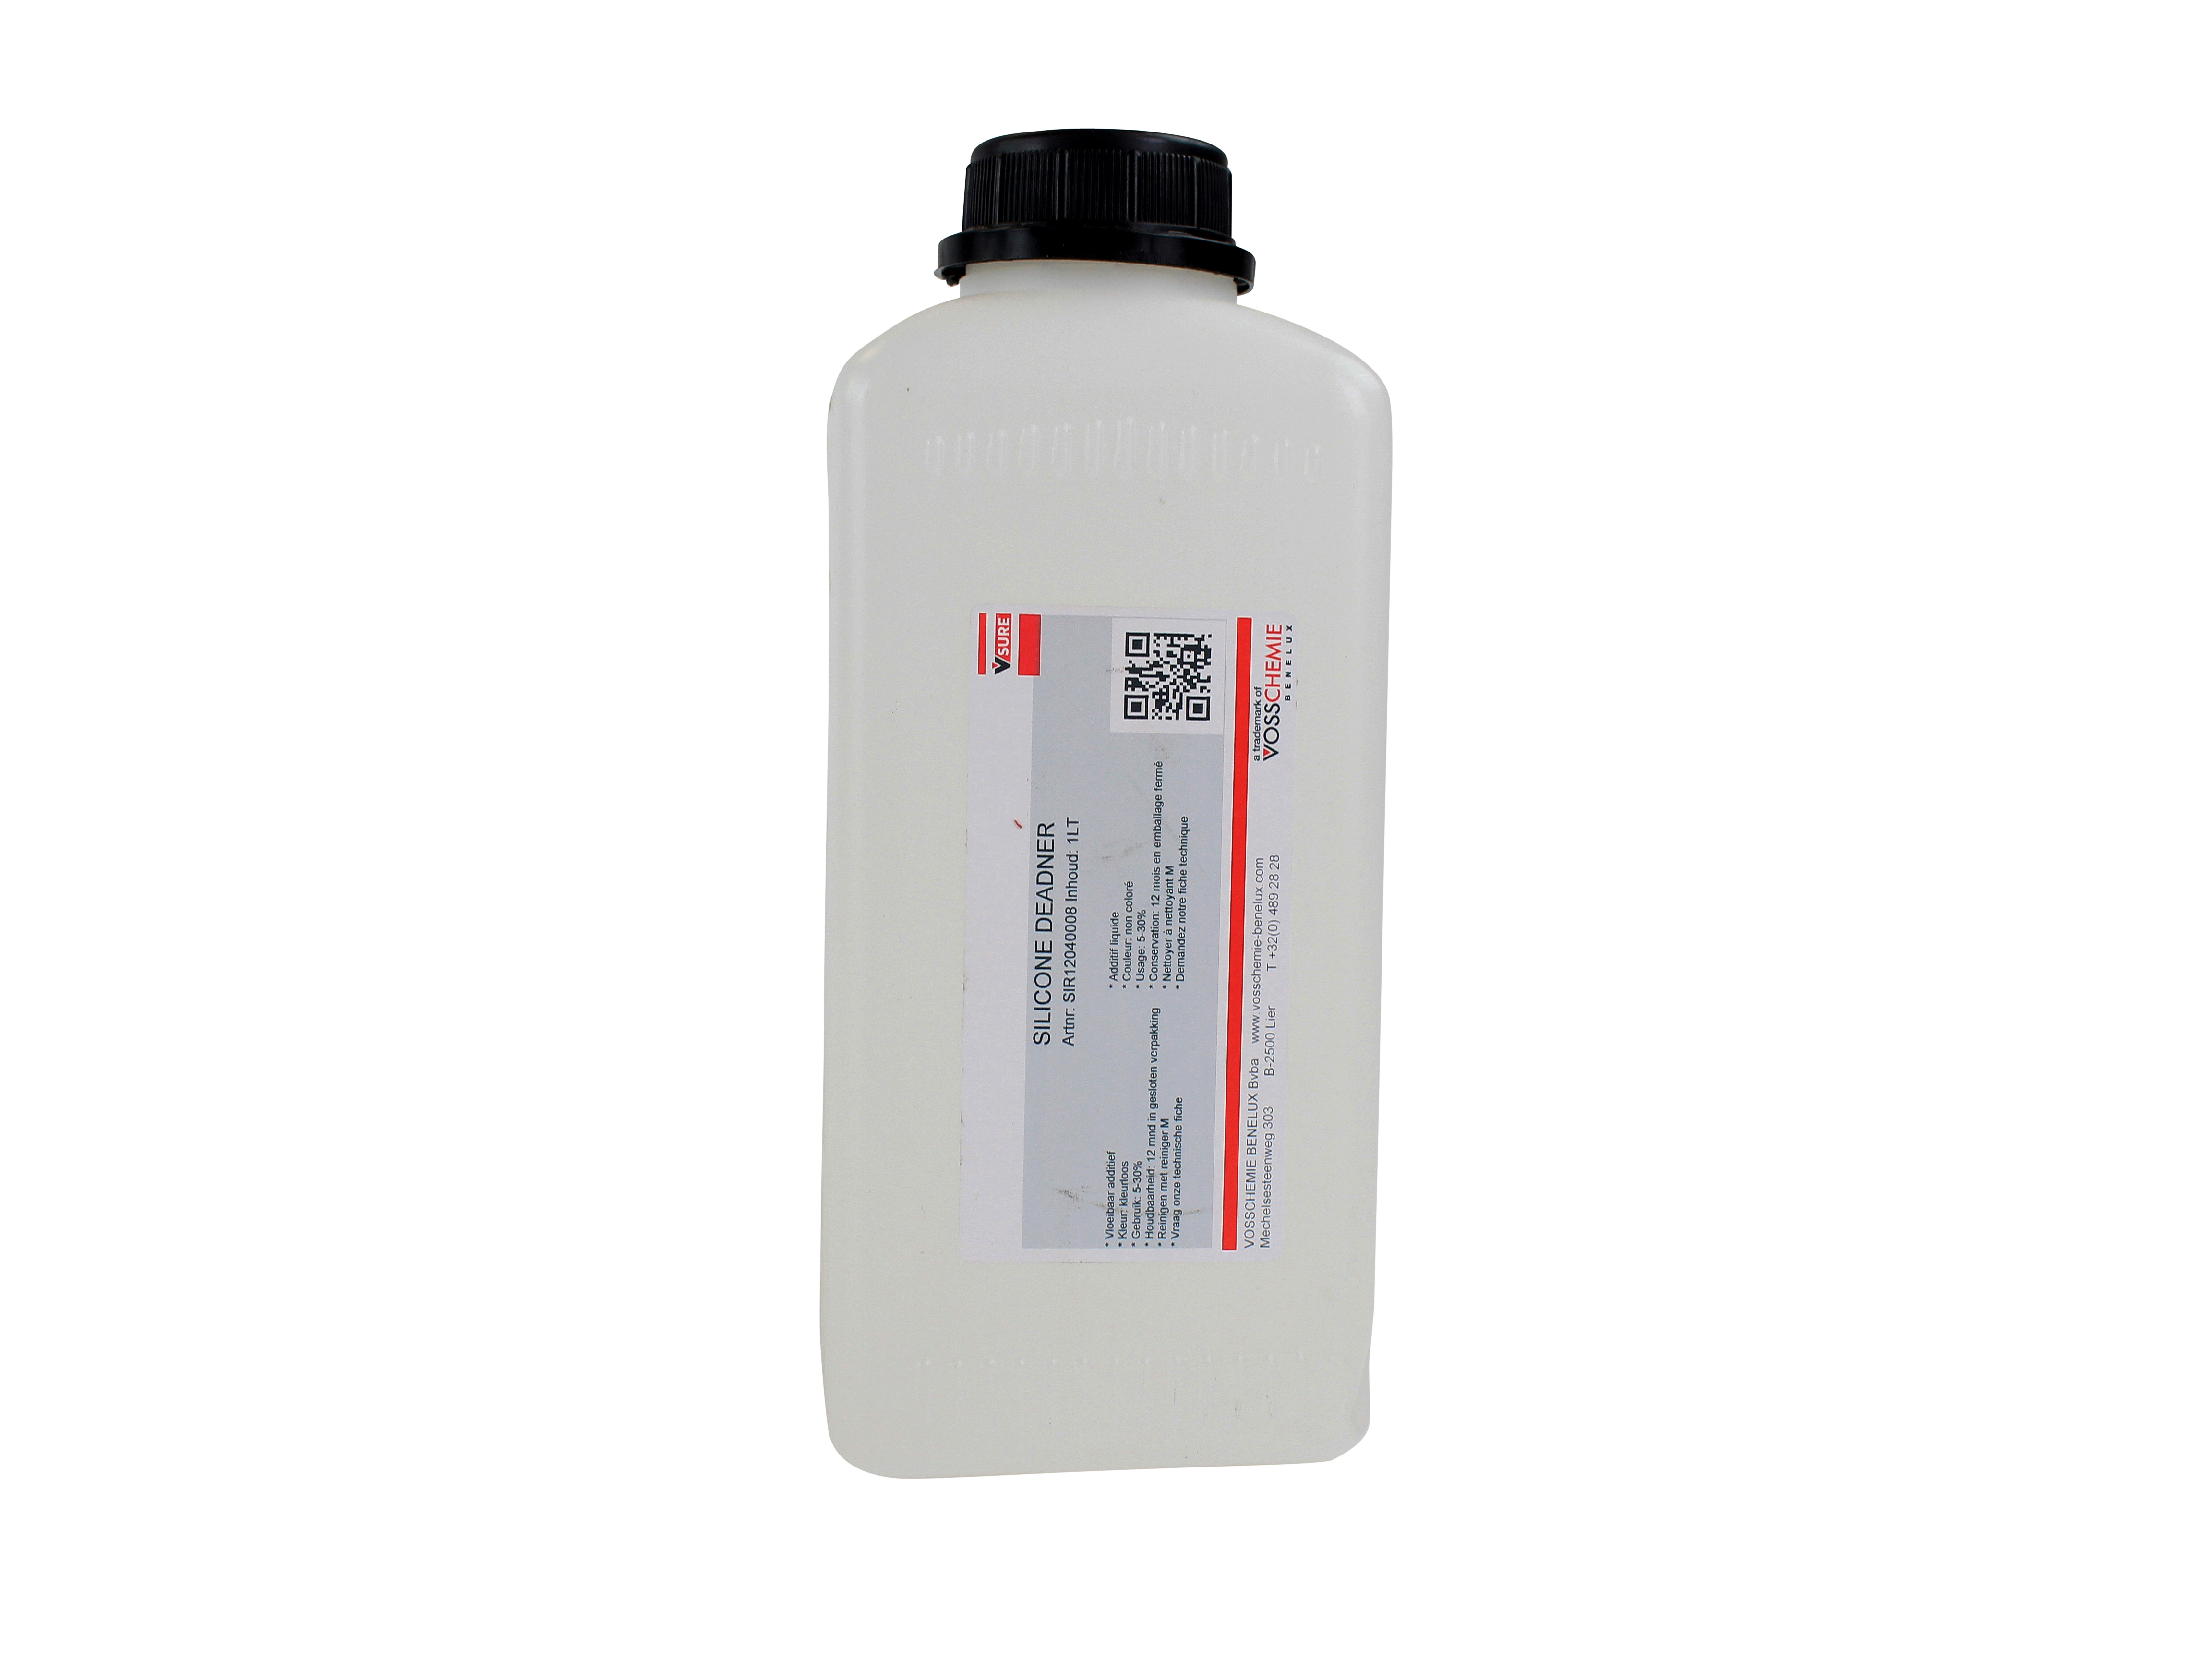 Silicone oil - diluent for your SFX silicones